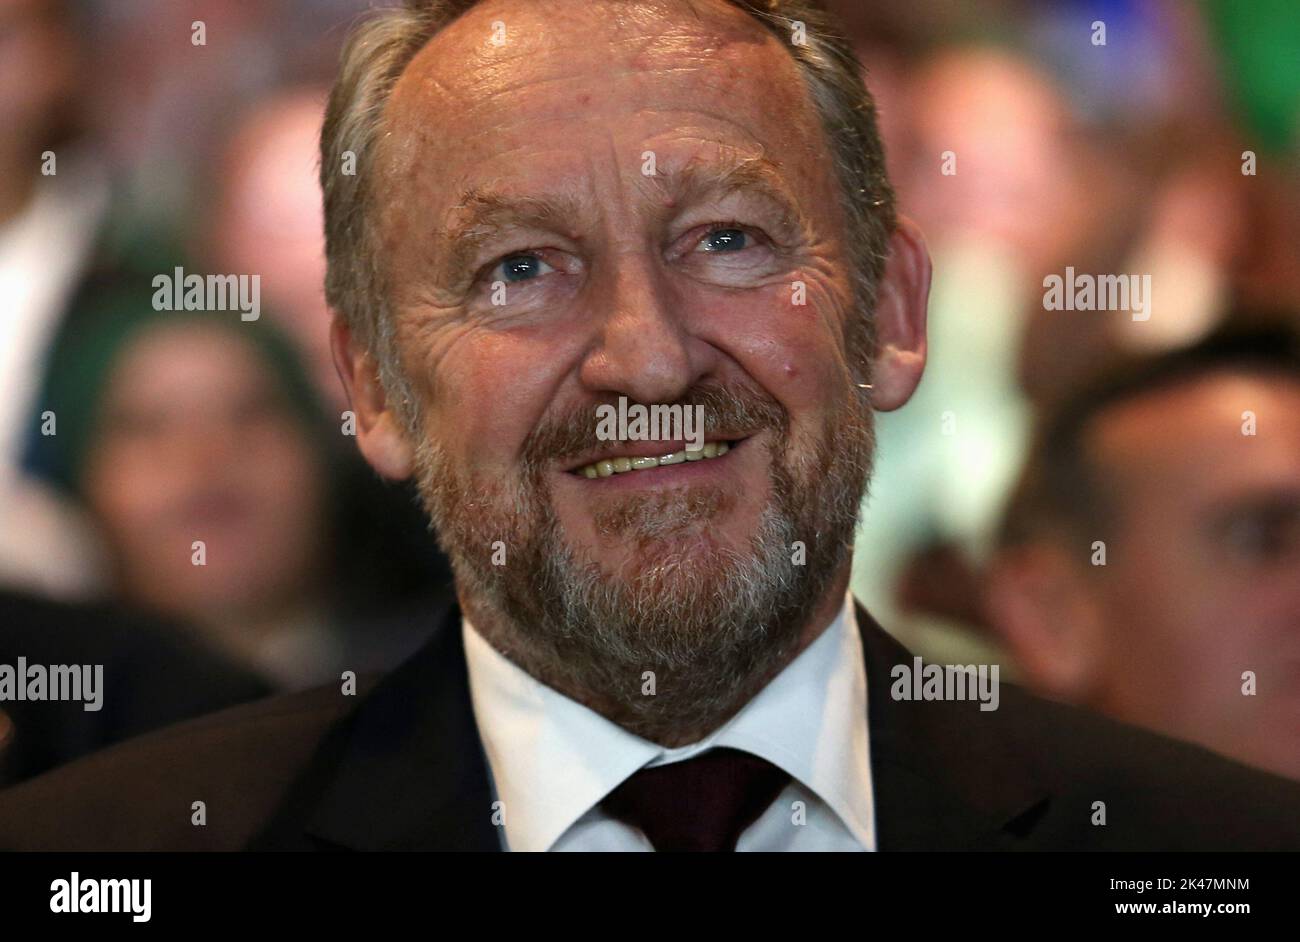 Bakir Izetbegovic of the Party of Democratic Action and Bosniak candidate of the Tri-partite Bosnian Presidency attends a final rally in Sarajevo, Bosnia and Herzegovina, September 30, 2022.REUTERS/Dado Ruvic Stock Photo